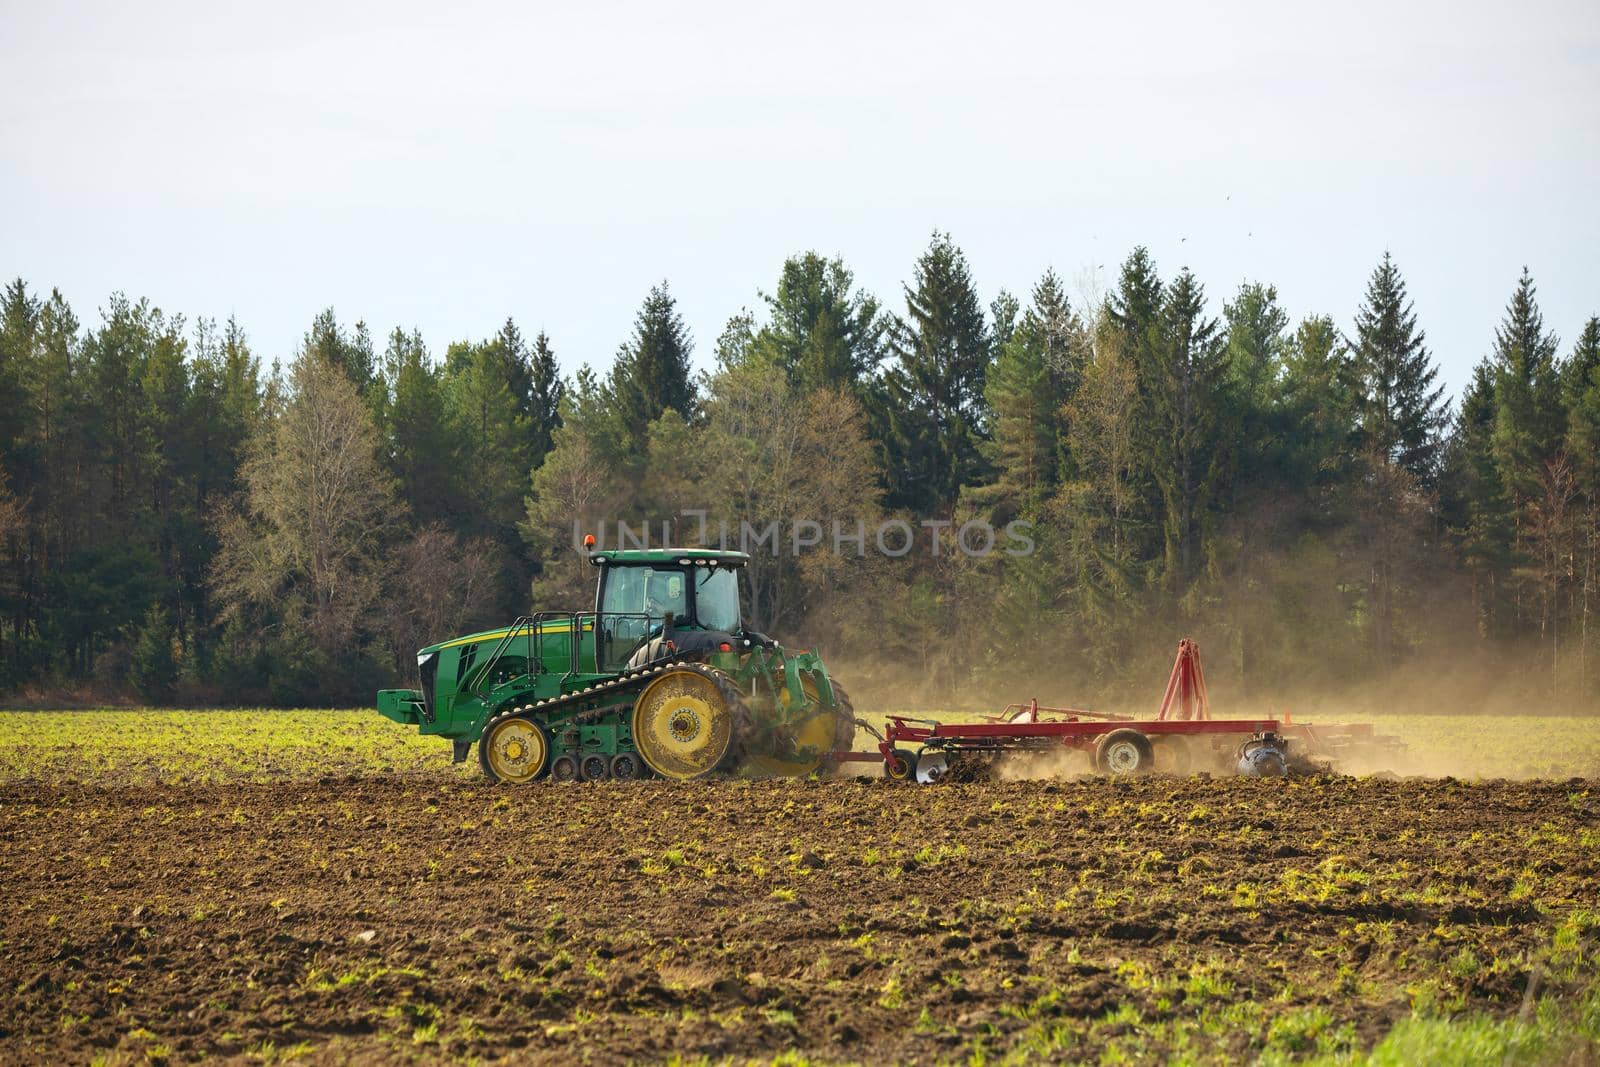 Crawler Tractor plowing ploughing field with Harrow in Spring on Farm with Dust Clouds by markvandam